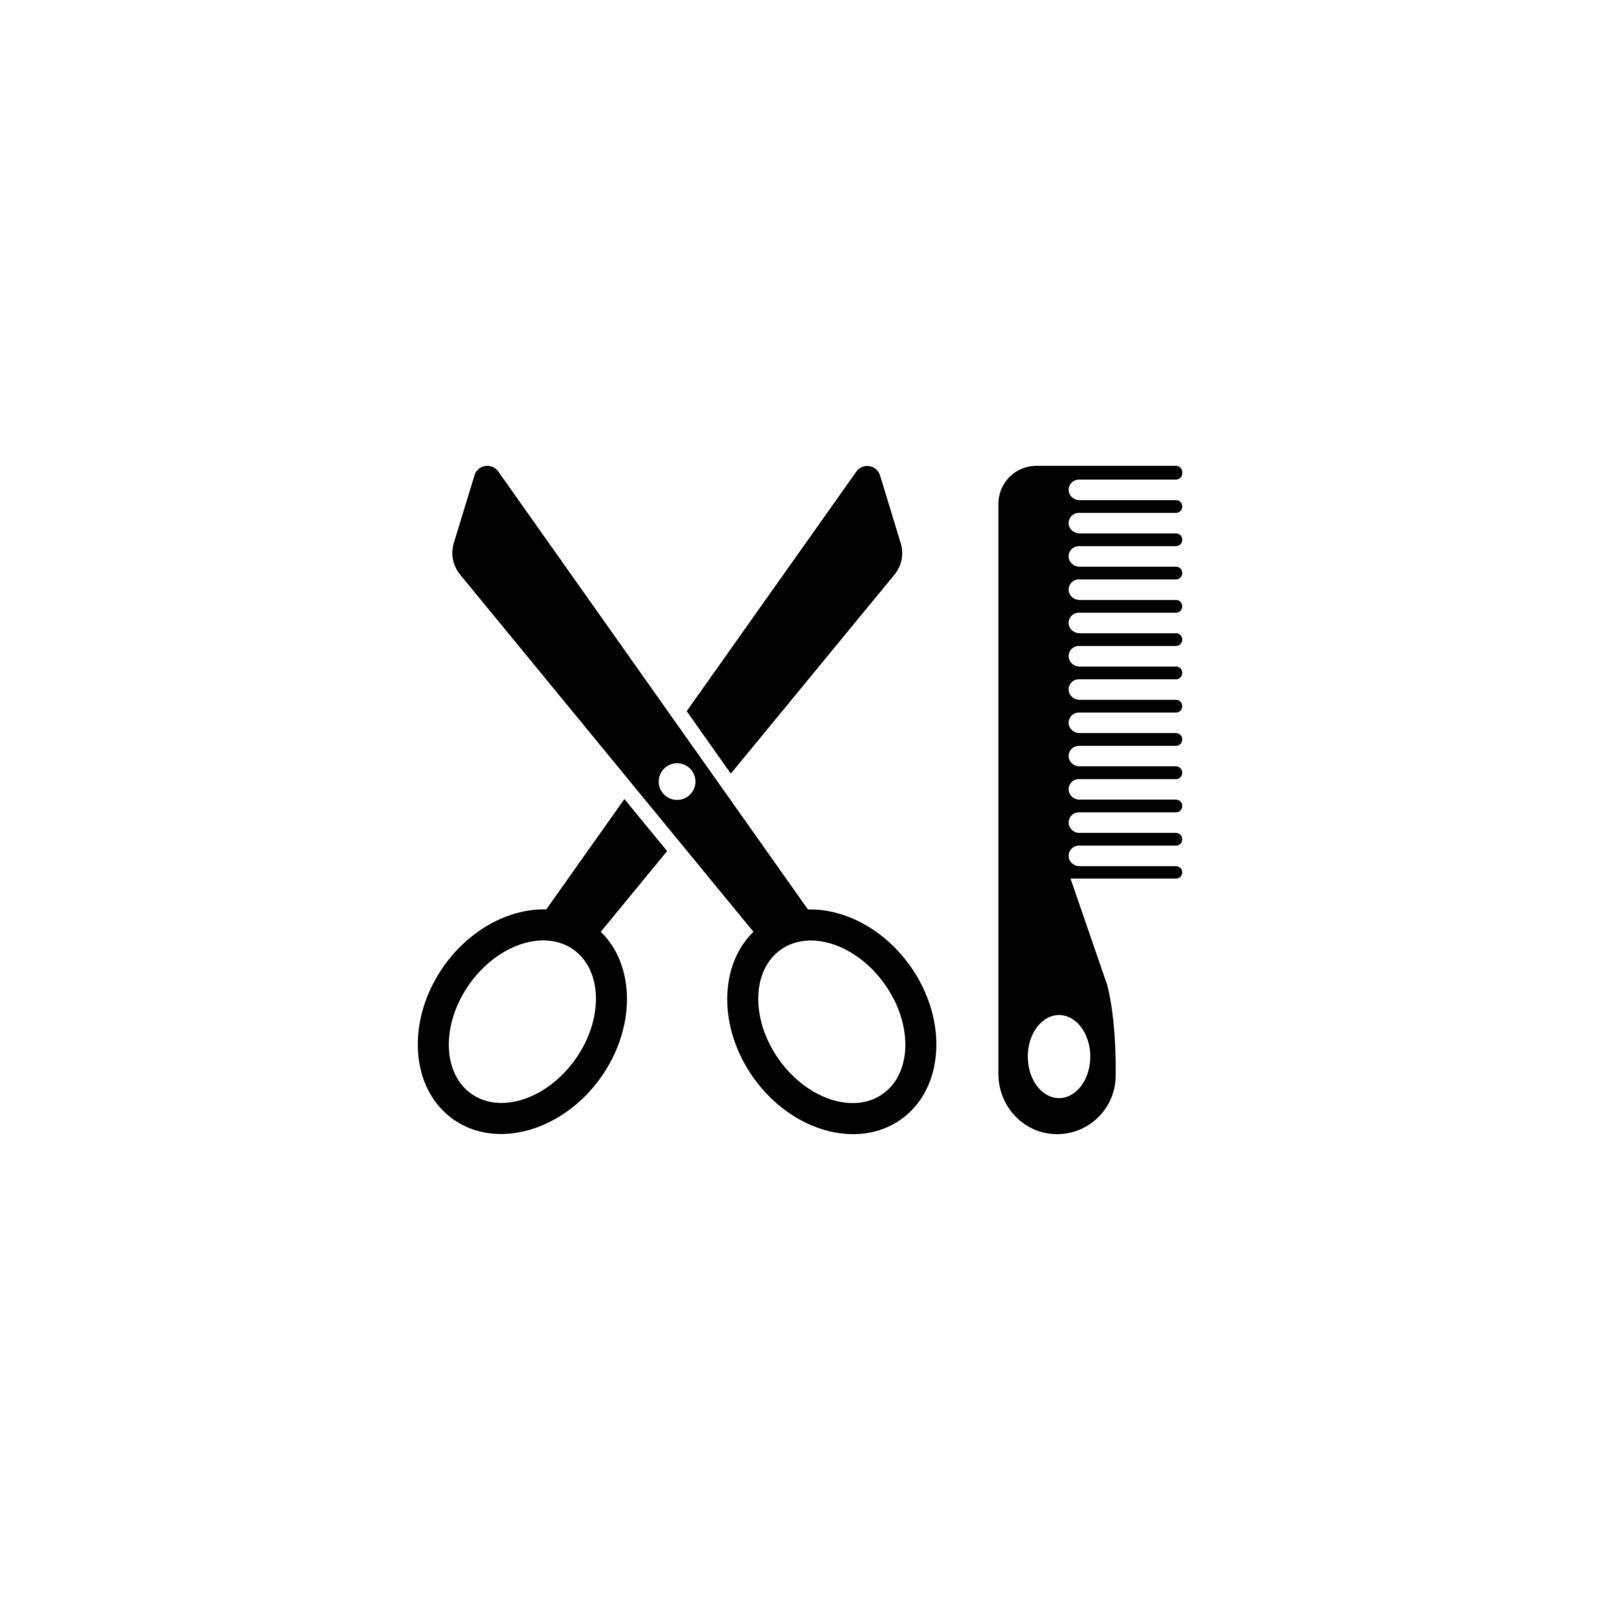 Scissors and Comb, Hairdresser Tools. Flat Vector Icon illustration. Simple black symbol on white background. Scissors and Comb, Hairdresser Tools sign design template for web and mobile UI element